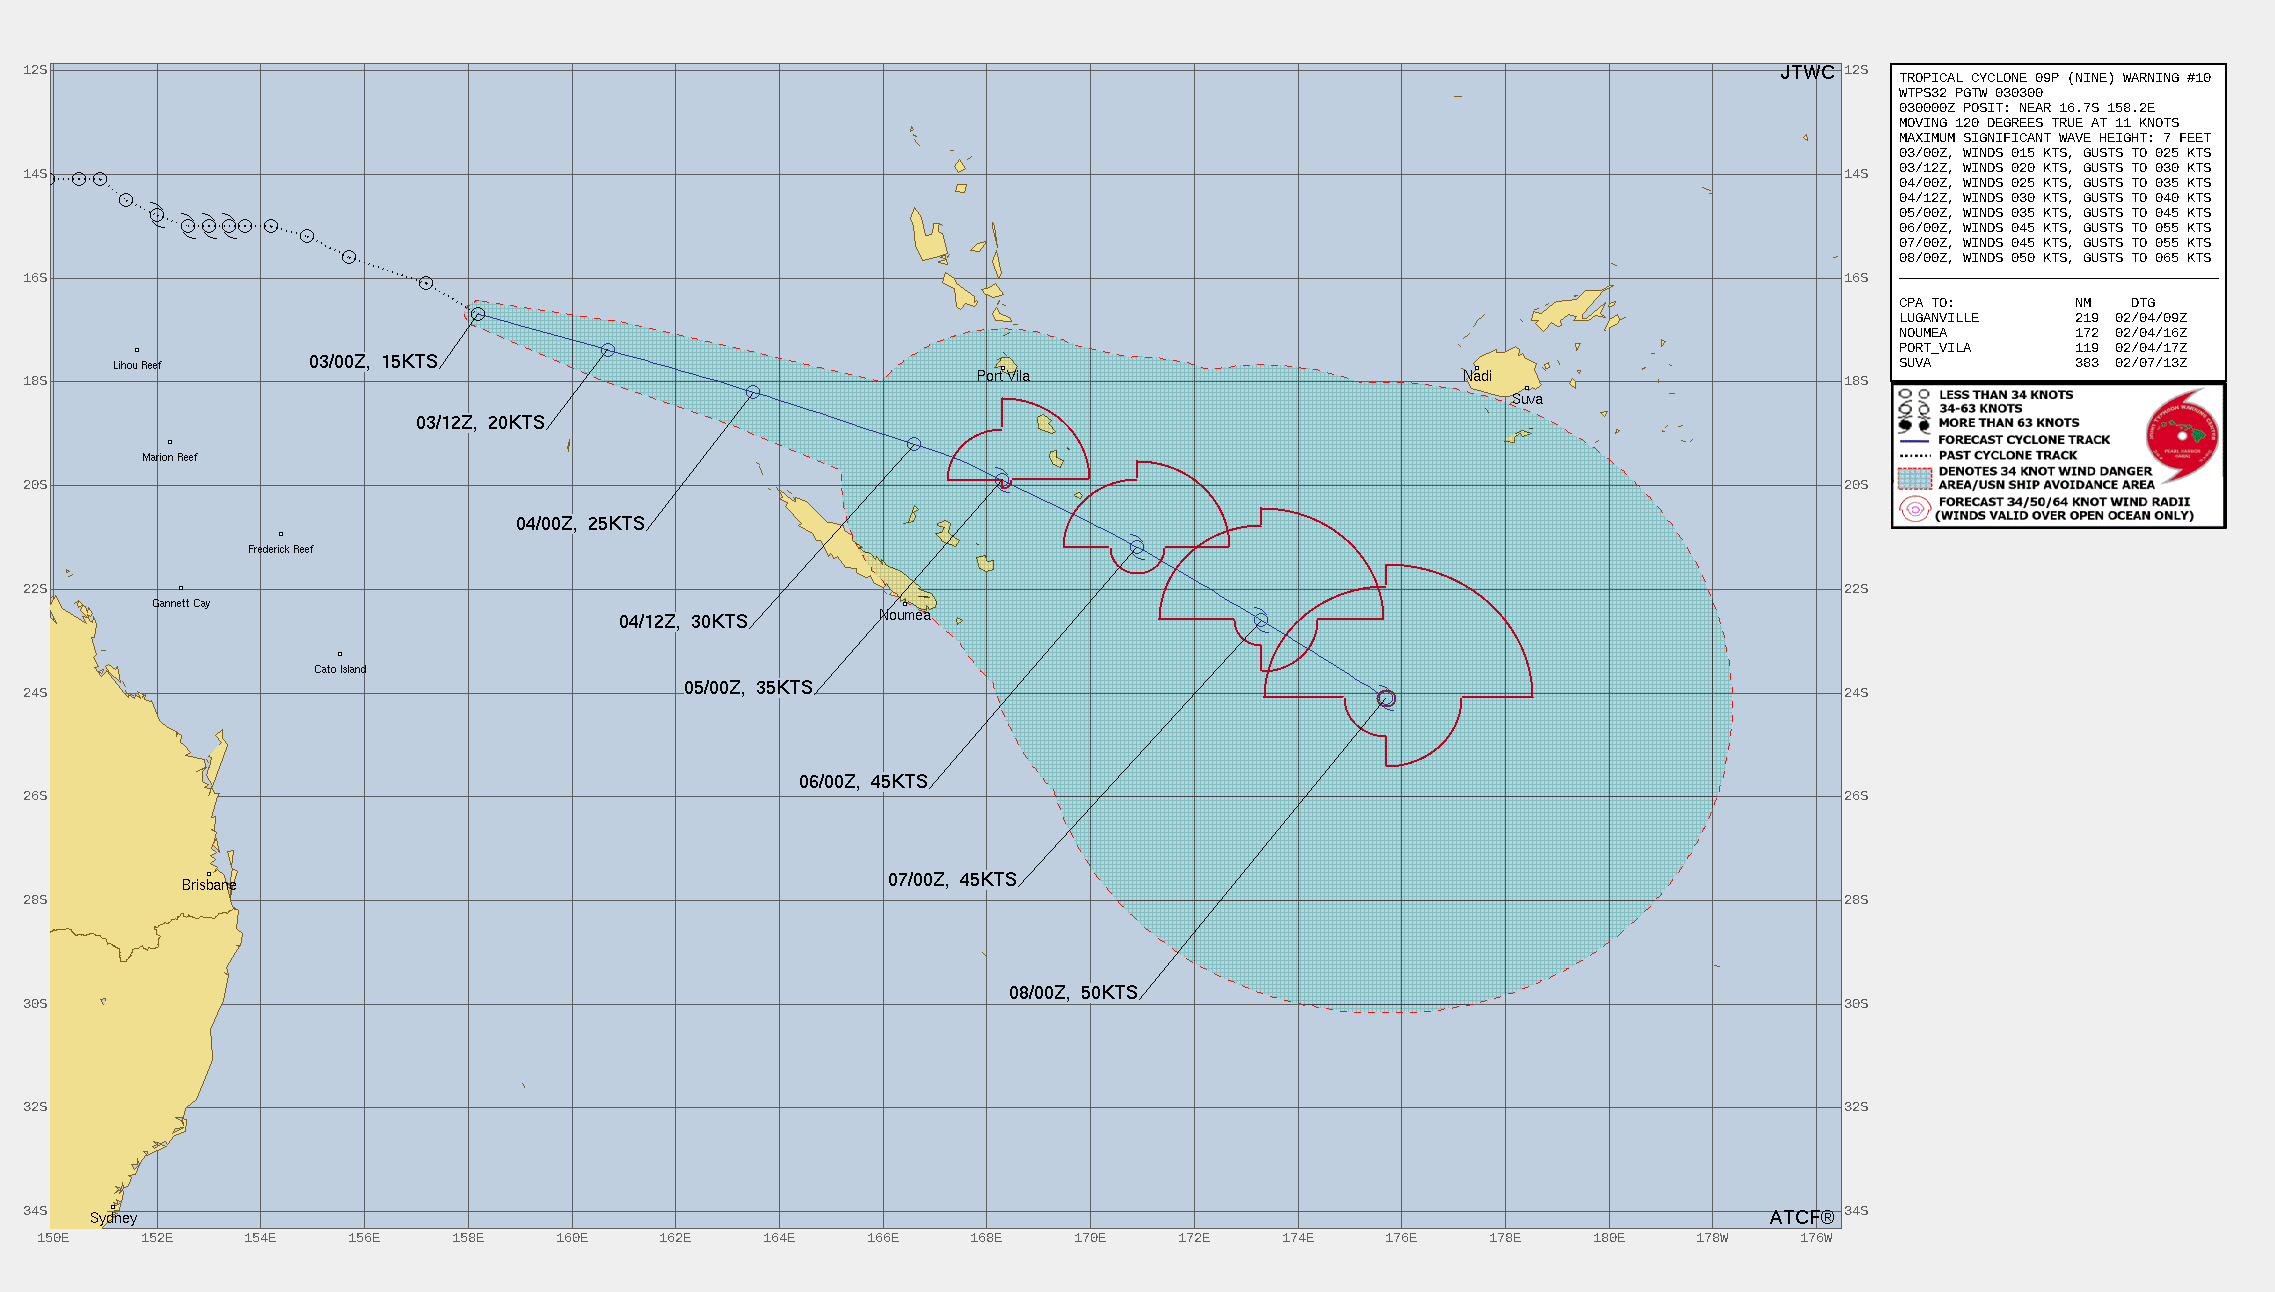 FORECAST REASONING.  SIGNIFICANT FORECAST CHANGES: THERE ARE NO SIGNIFICANT CHANGES TO THE FORECAST FROM THE PREVIOUS WARNING.  FORECAST DISCUSSION: TC 09P IS FORECAST TO TRACK EAST-SOUTHEASTWARD UNDER THE INFLUENCE OF THE NEAR EQUATORIAL RIDGE UNTIL 48H, AT WHICH POINT THE SYSTEM WILL TURN SOUTHEASTWARD AS THE RIDGE REORIENTS. A MARGINAL ENVIRONMENT CONSISTING OF DRY AIR ENTRAINMENT, WEAK OUTFLOW ALOFT, AND MODERATE VERTICAL WIND SHEAR WILL ALLOW FOR ONLY GRADUAL INTENSIFICATION IN THE EARLY PORTION OF THE FORECAST. SOMETIME AFTER 36H, THE ENVIRONMENT WIL BECOME MORE FAVORABLE AS POLEWARD OUTFLOW IMPROVES AND THE CORE ENVIRONMENT MOISTENS. THIS WILL ALLOW THE SYSTEM TO REACH AN INTENSITY OF 50 KTS BY 120H.